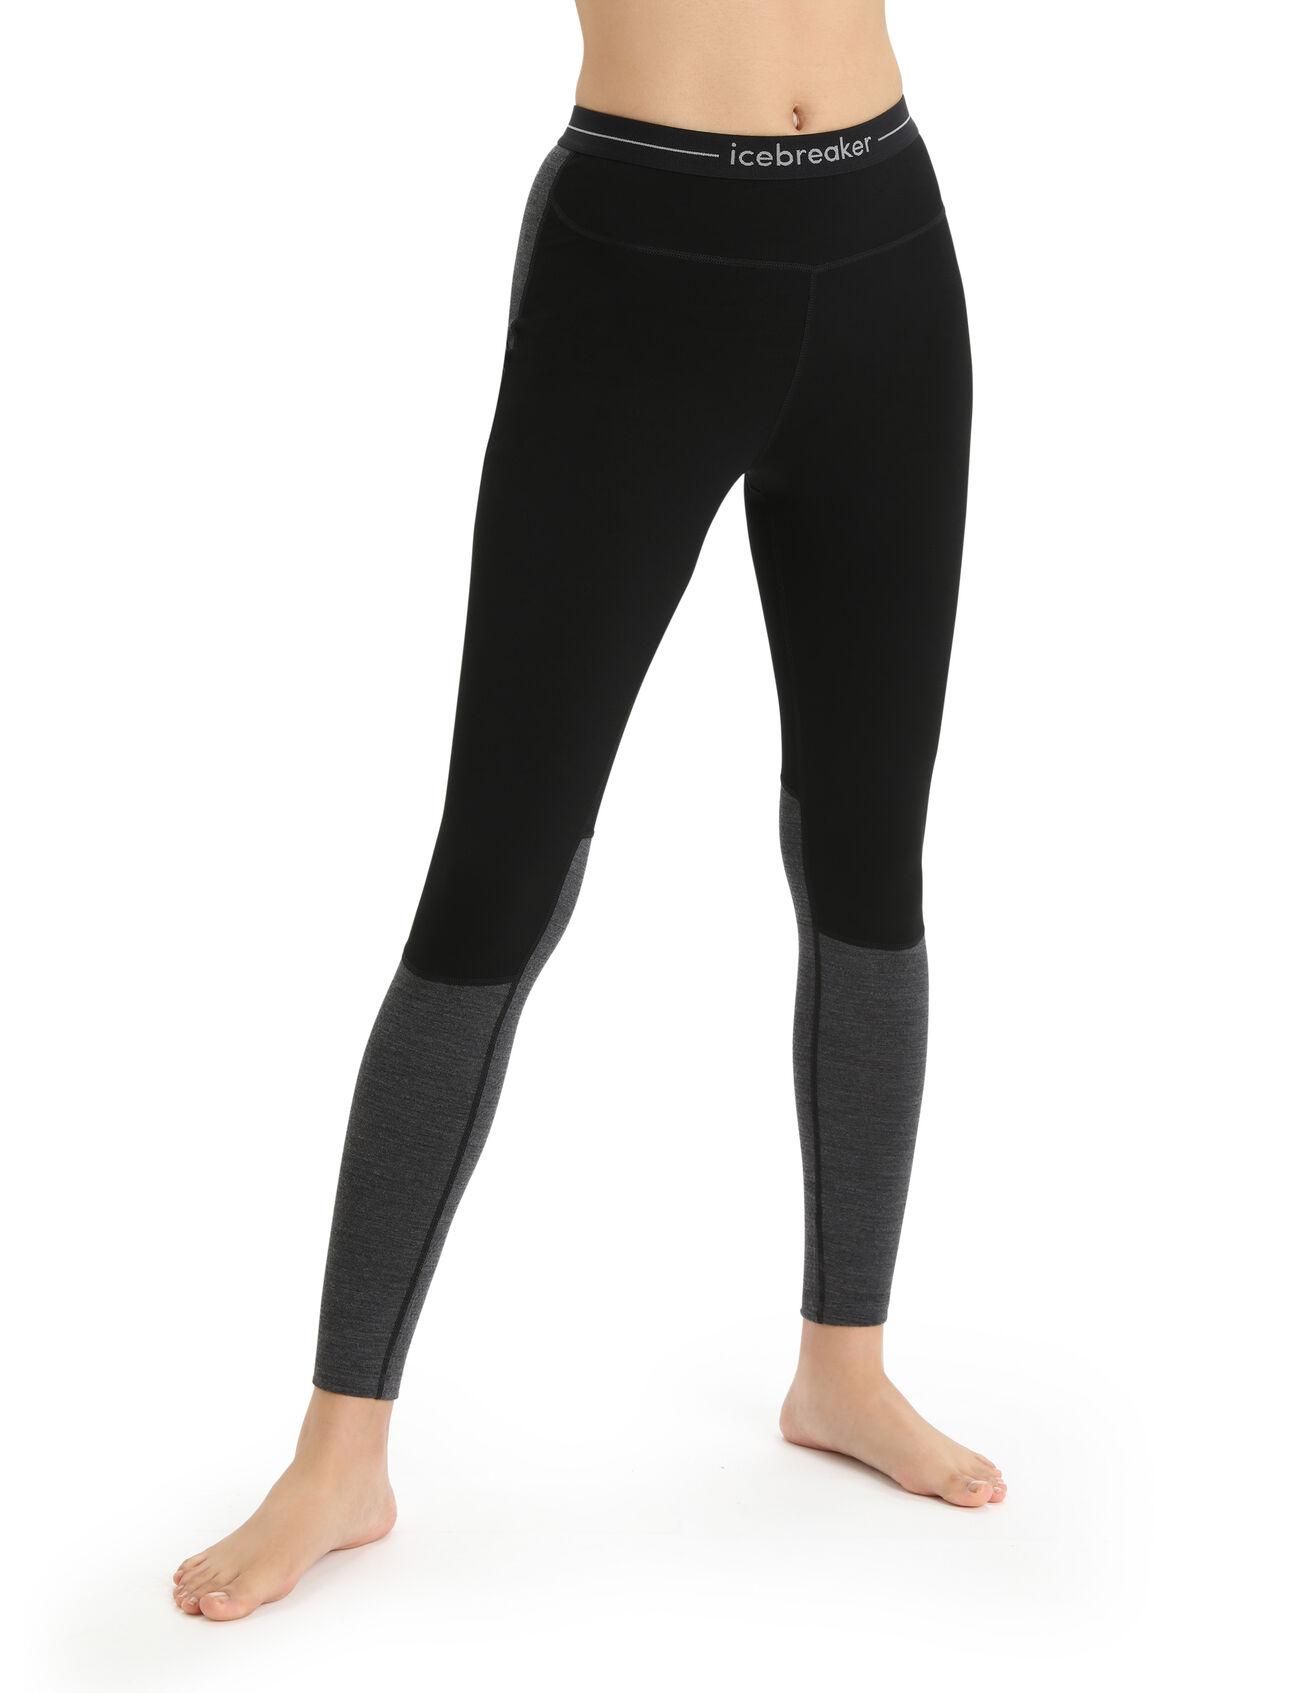 Womens 200 ZoneKnit™ Merino Leggings Midweight merino base layer bottoms designed to help regulate temperature during high-intensity activity, the 200 ZoneKnit™ Leggings feature 100% pure and natural merino wool.